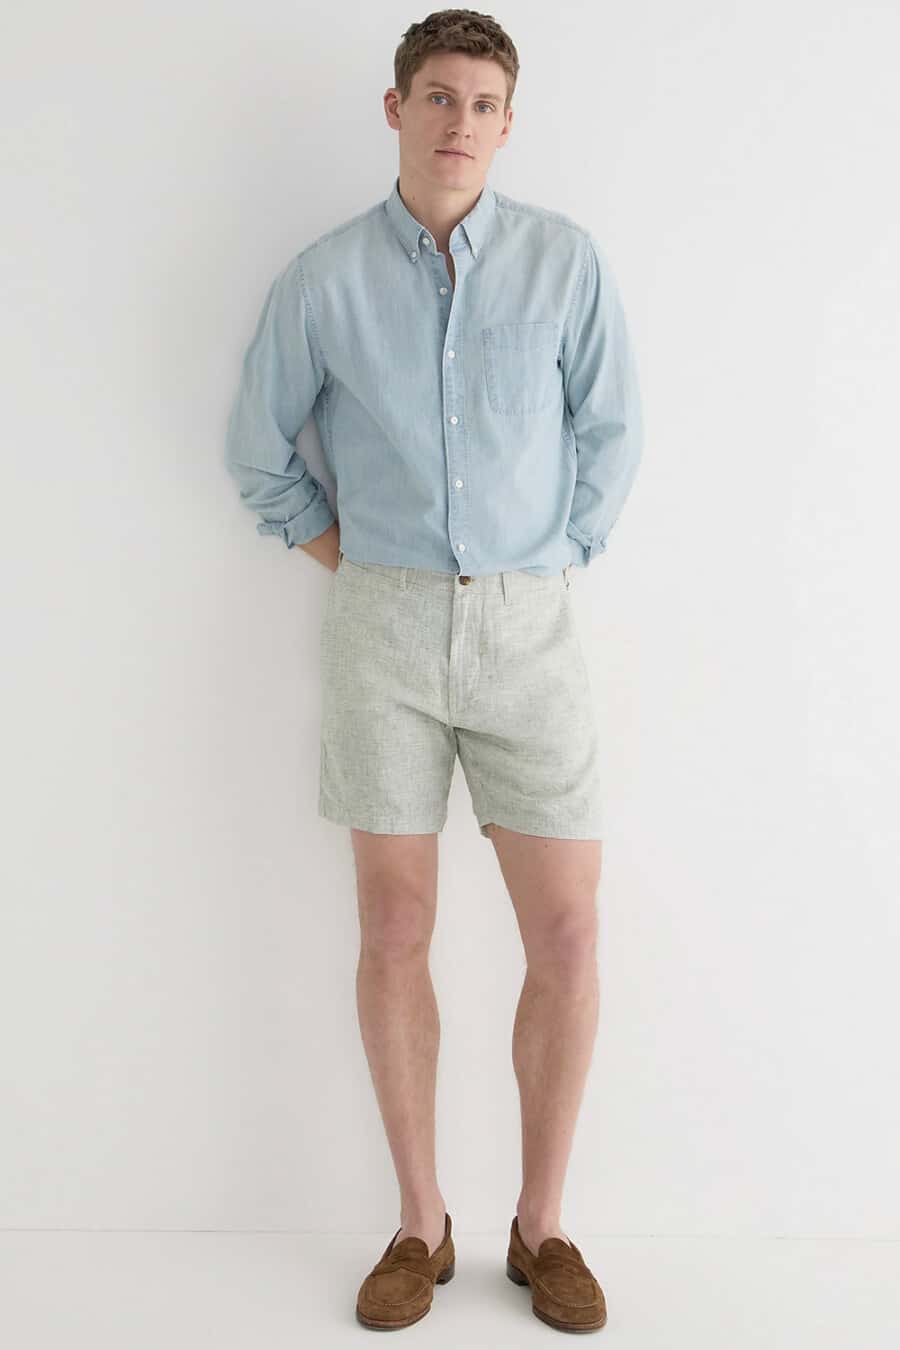 Men's light green shorts, light blue denim/chambray shirt and brown suede loafers outfit